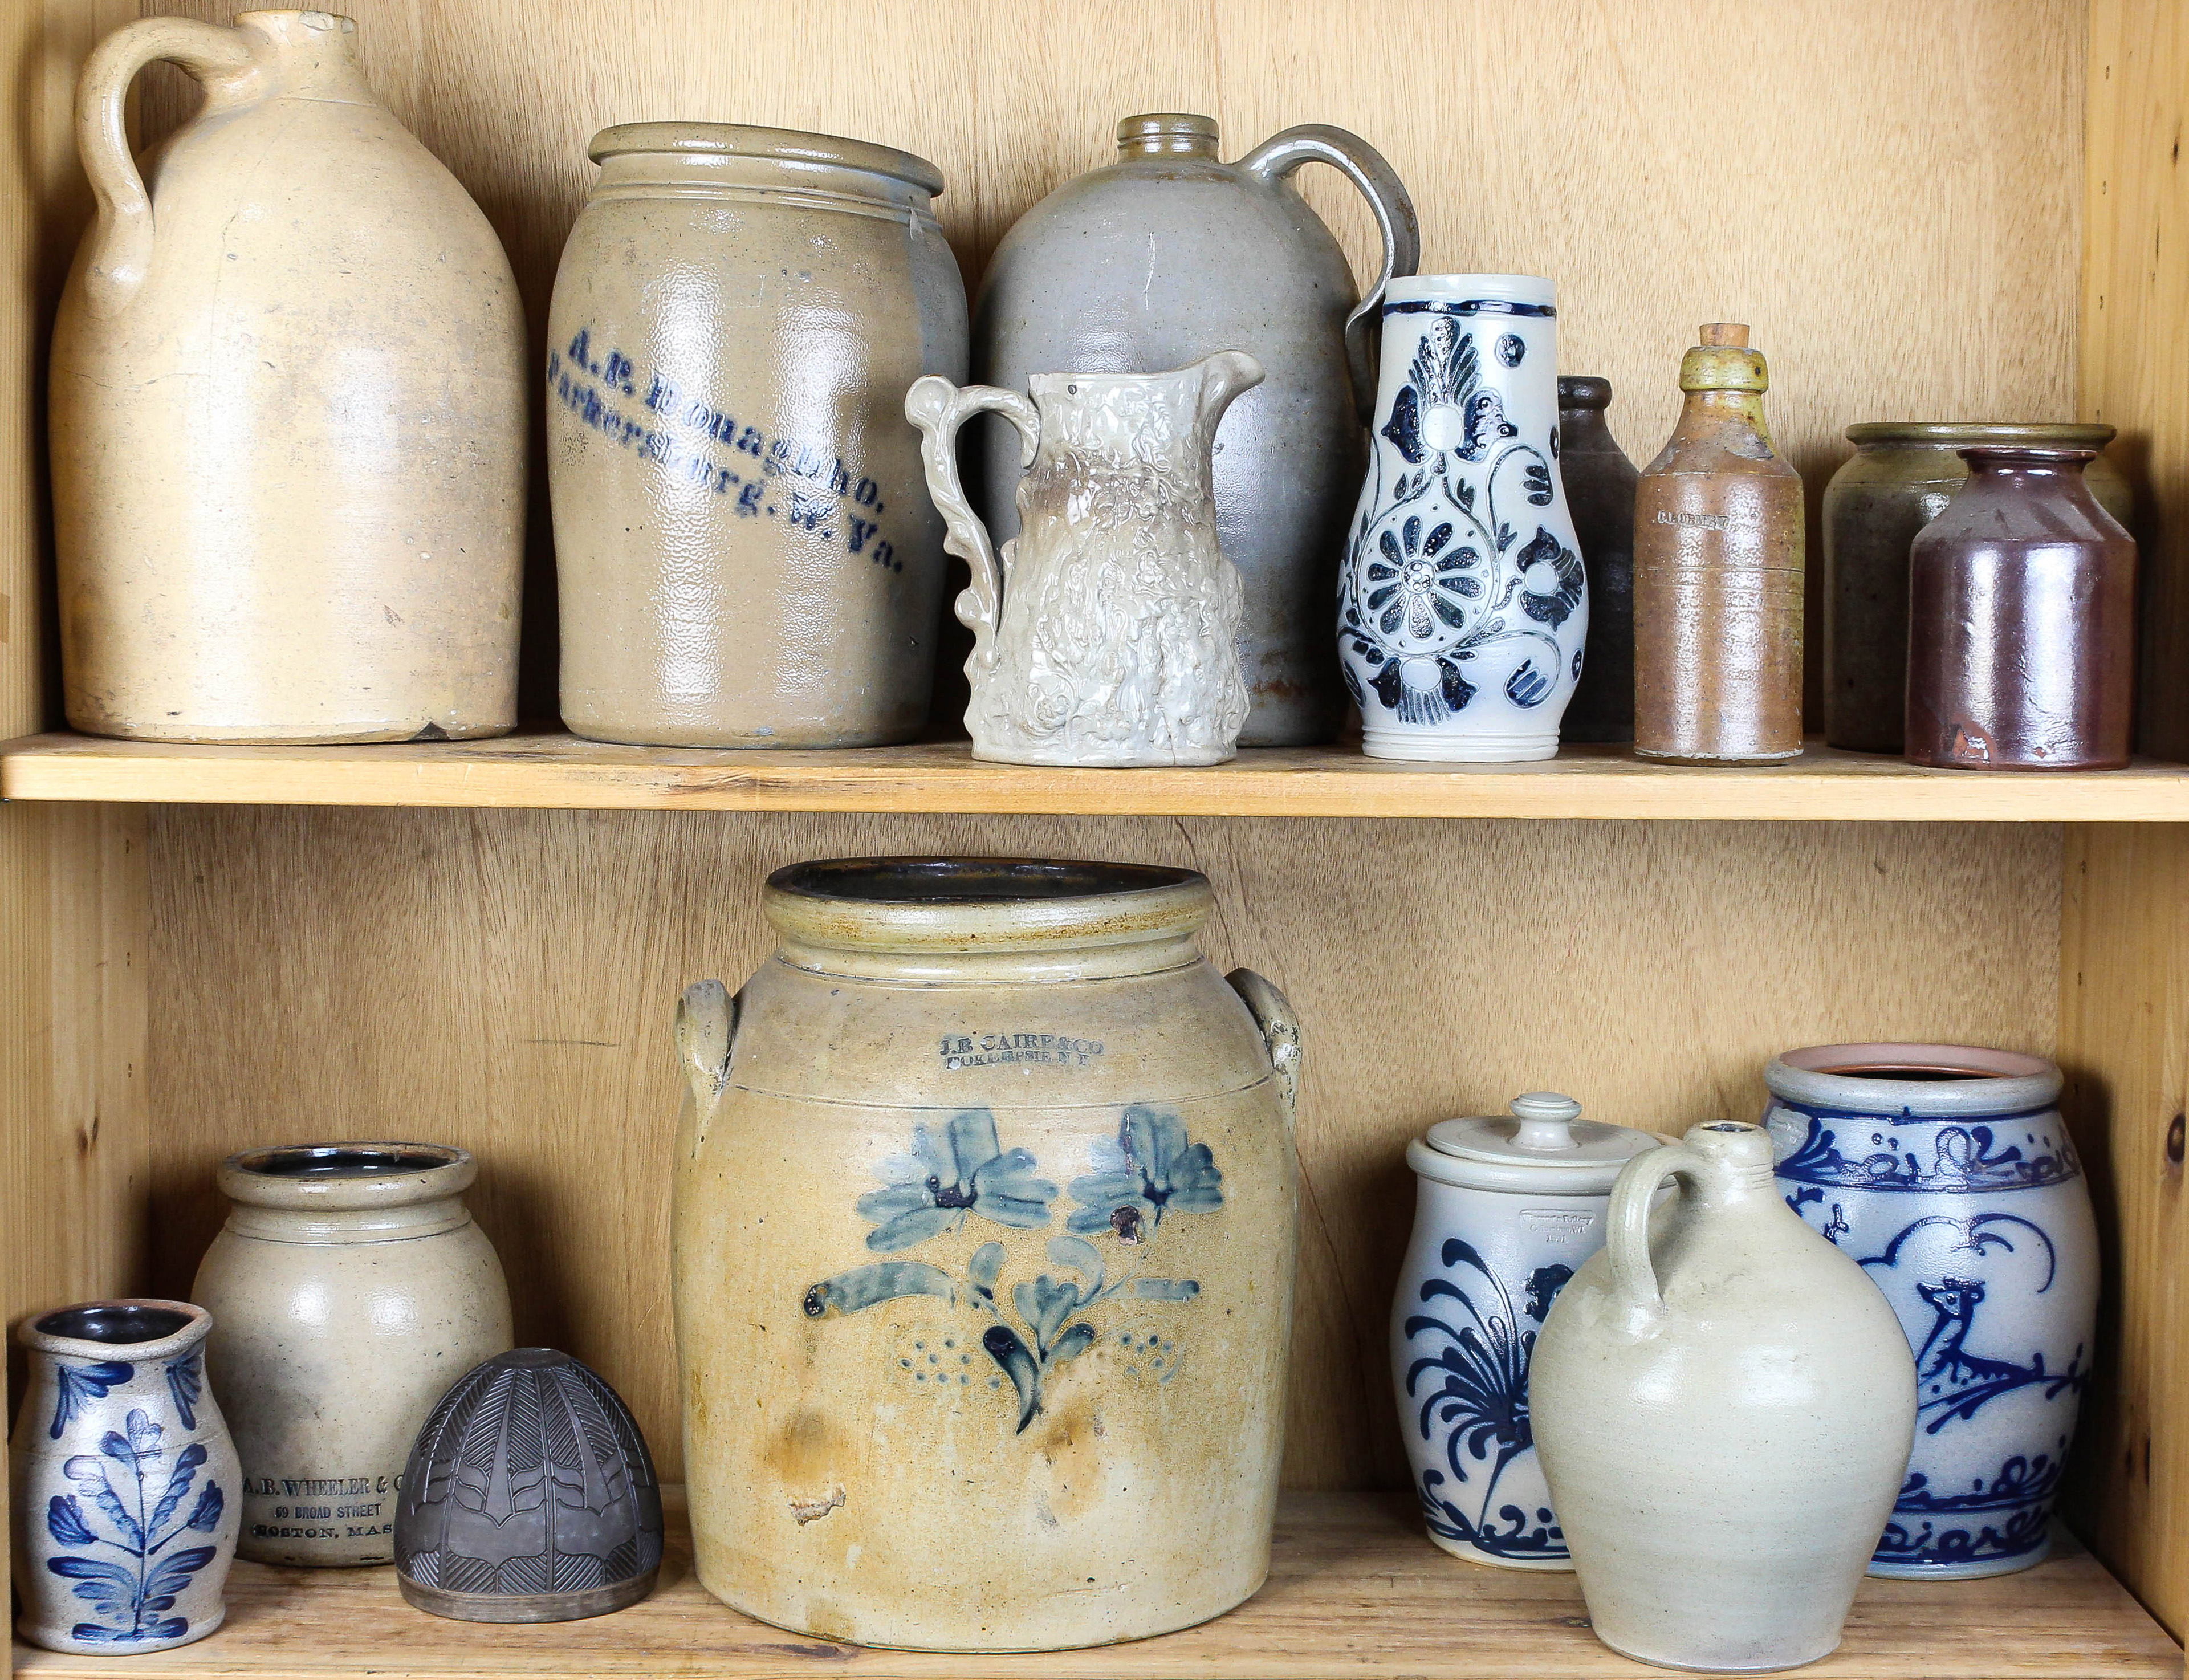 TWO SHELVES OF STONEWARE JARS AND 3a4f49